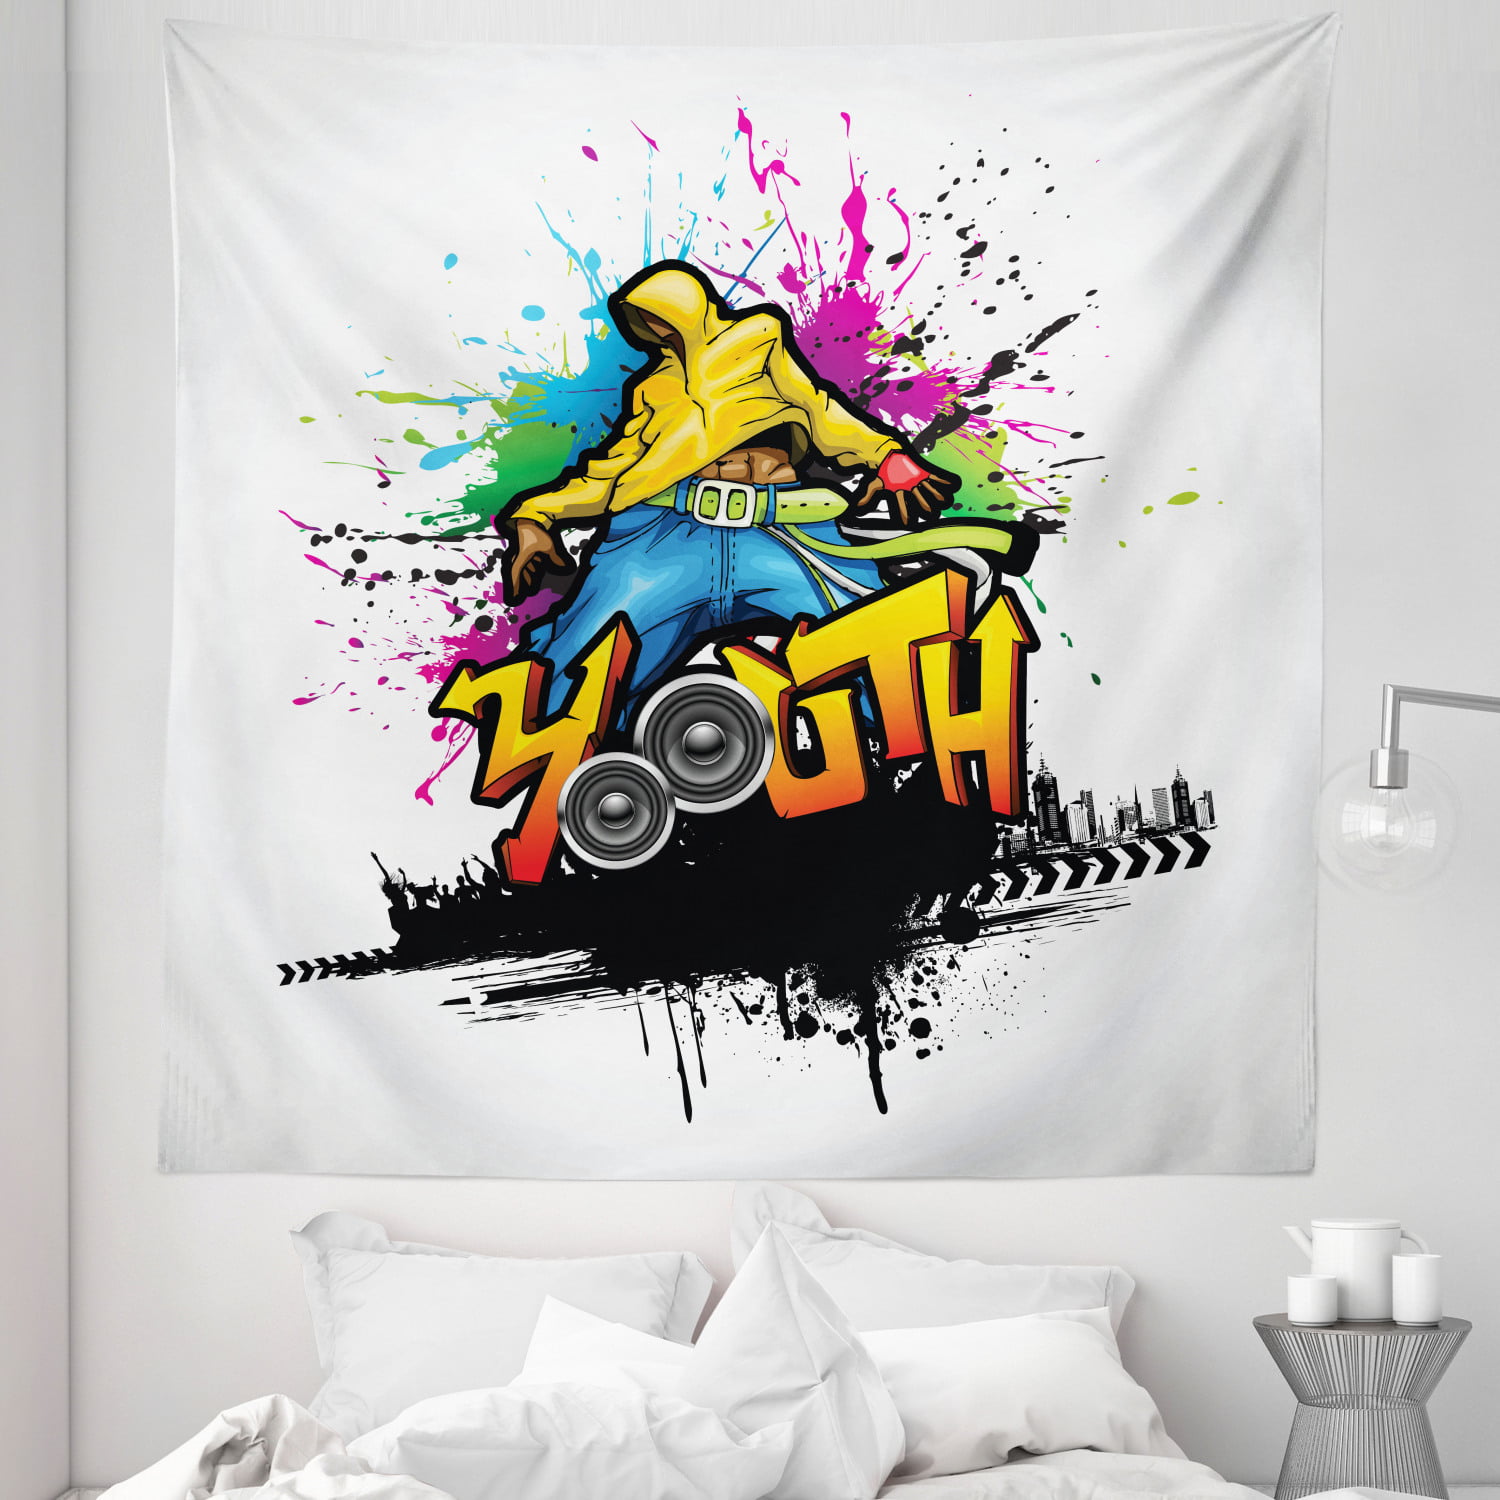 Youth Tapestry, Young Man Hip Hop Culture Graffiti Art and Street Culture  Performer Colorful Grunge, Fabric Wall Hanging Decor for Bedroom Living Room  Dorm, Sizes, Multicolor, by Ambesonne